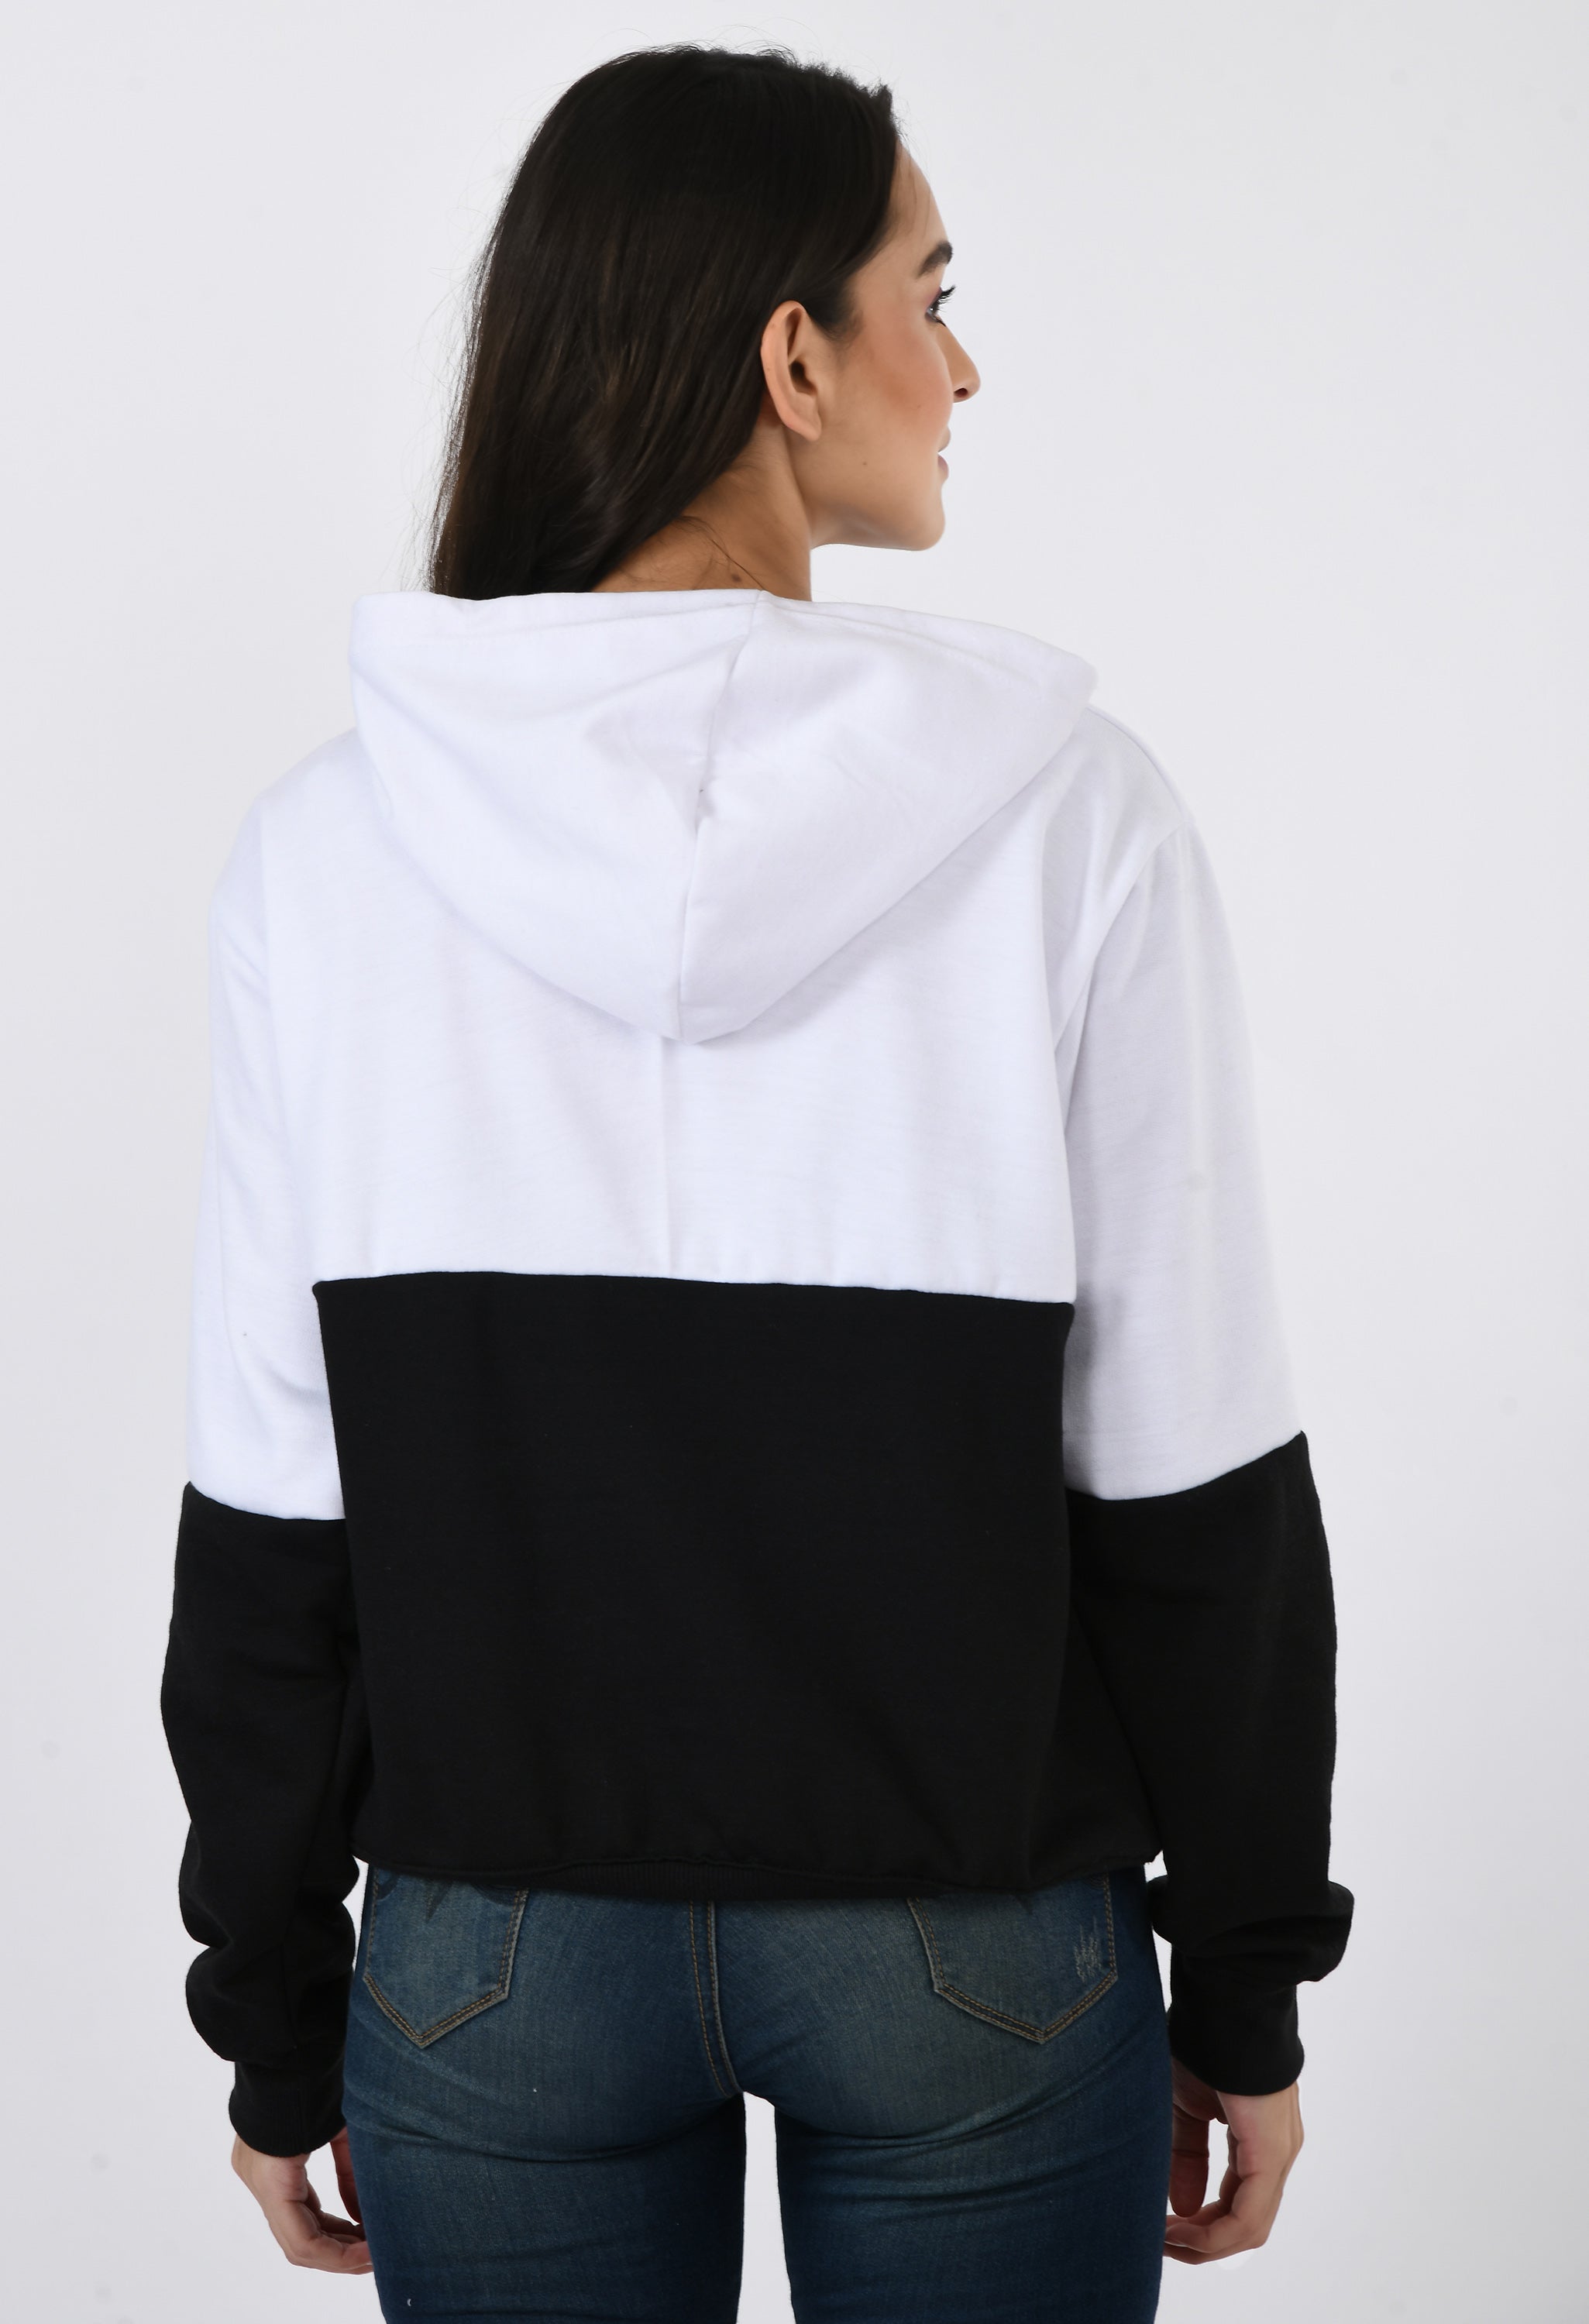 Plain Black And White Hoodie For Women And Girls | Pullover Sweatshirts